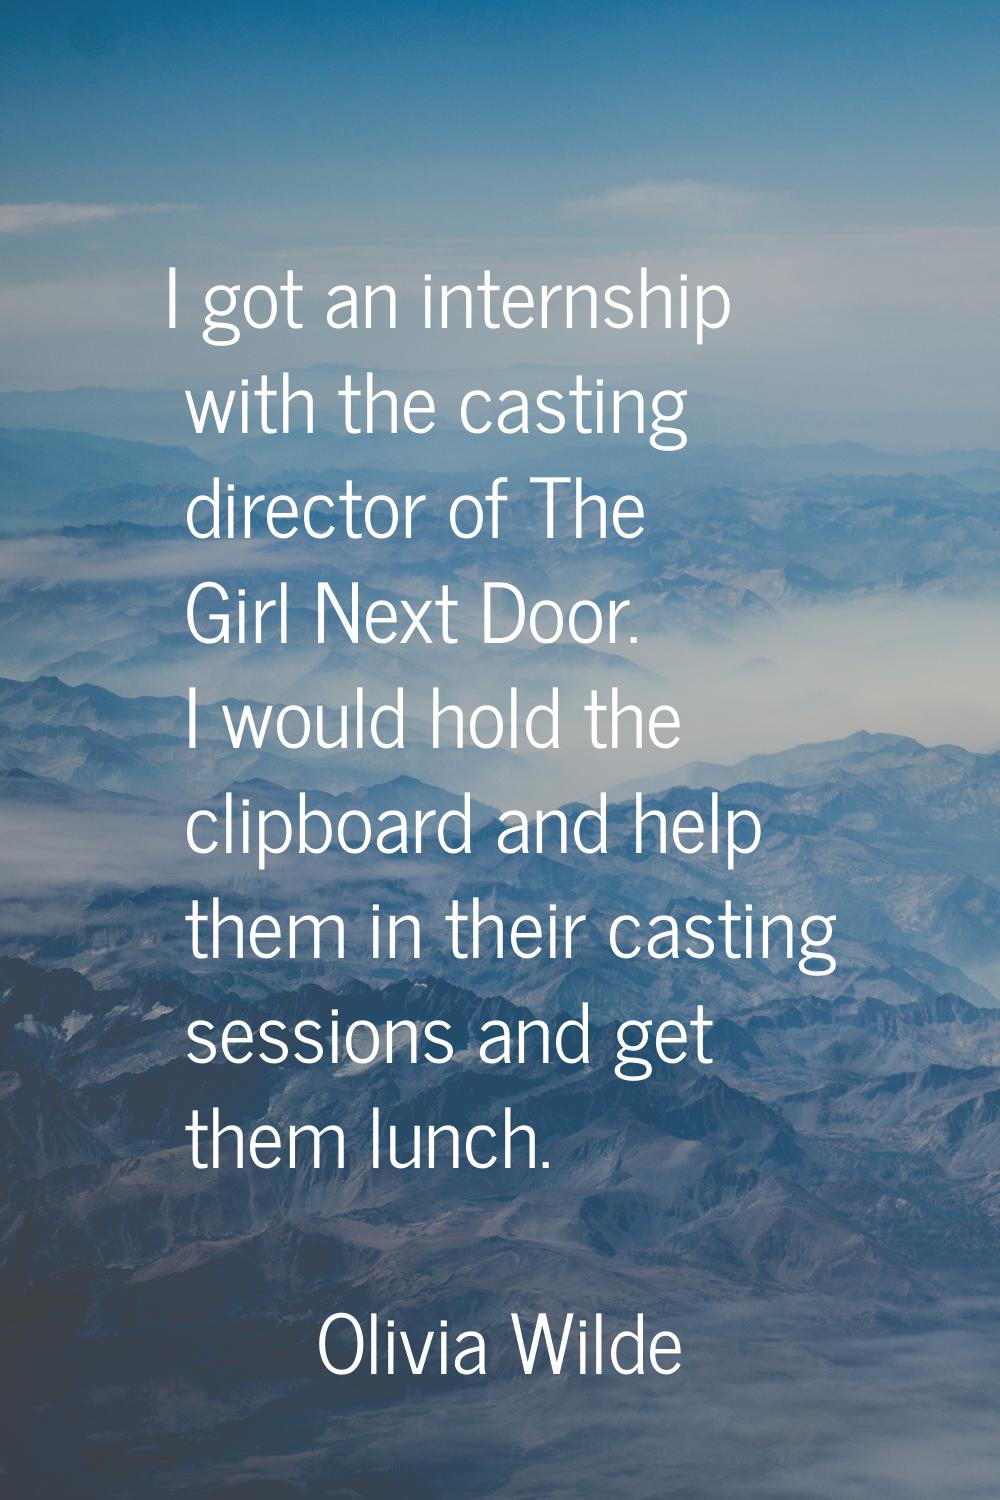 I got an internship with the casting director of The Girl Next Door. I would hold the clipboard and